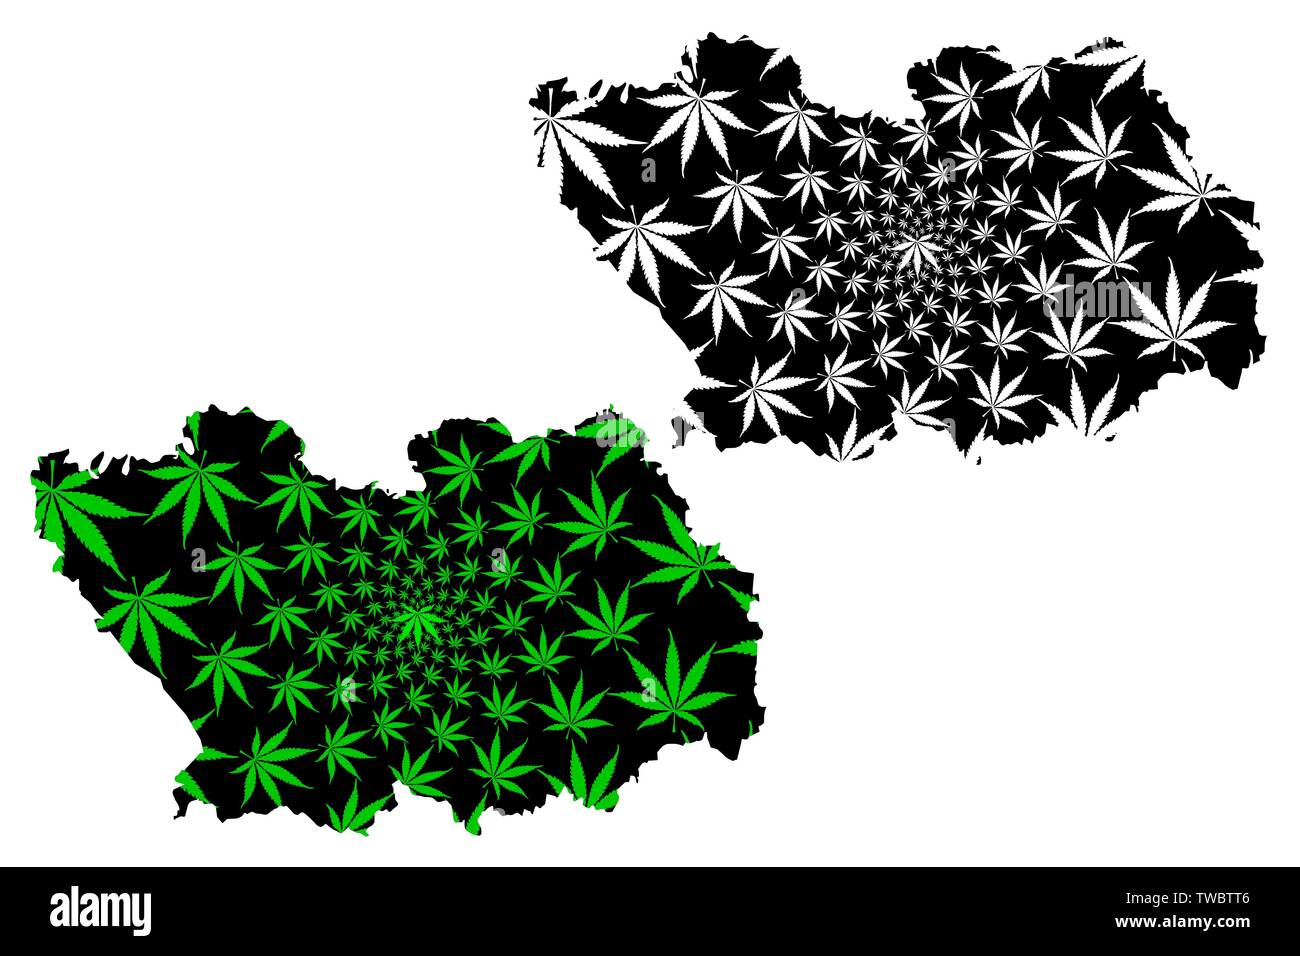 Penza Oblast (Russia, Subjects of the Russian Federation, Oblasts of Russia) map is designed cannabis leaf green and black, Penza Oblast map made of m Stock Vector